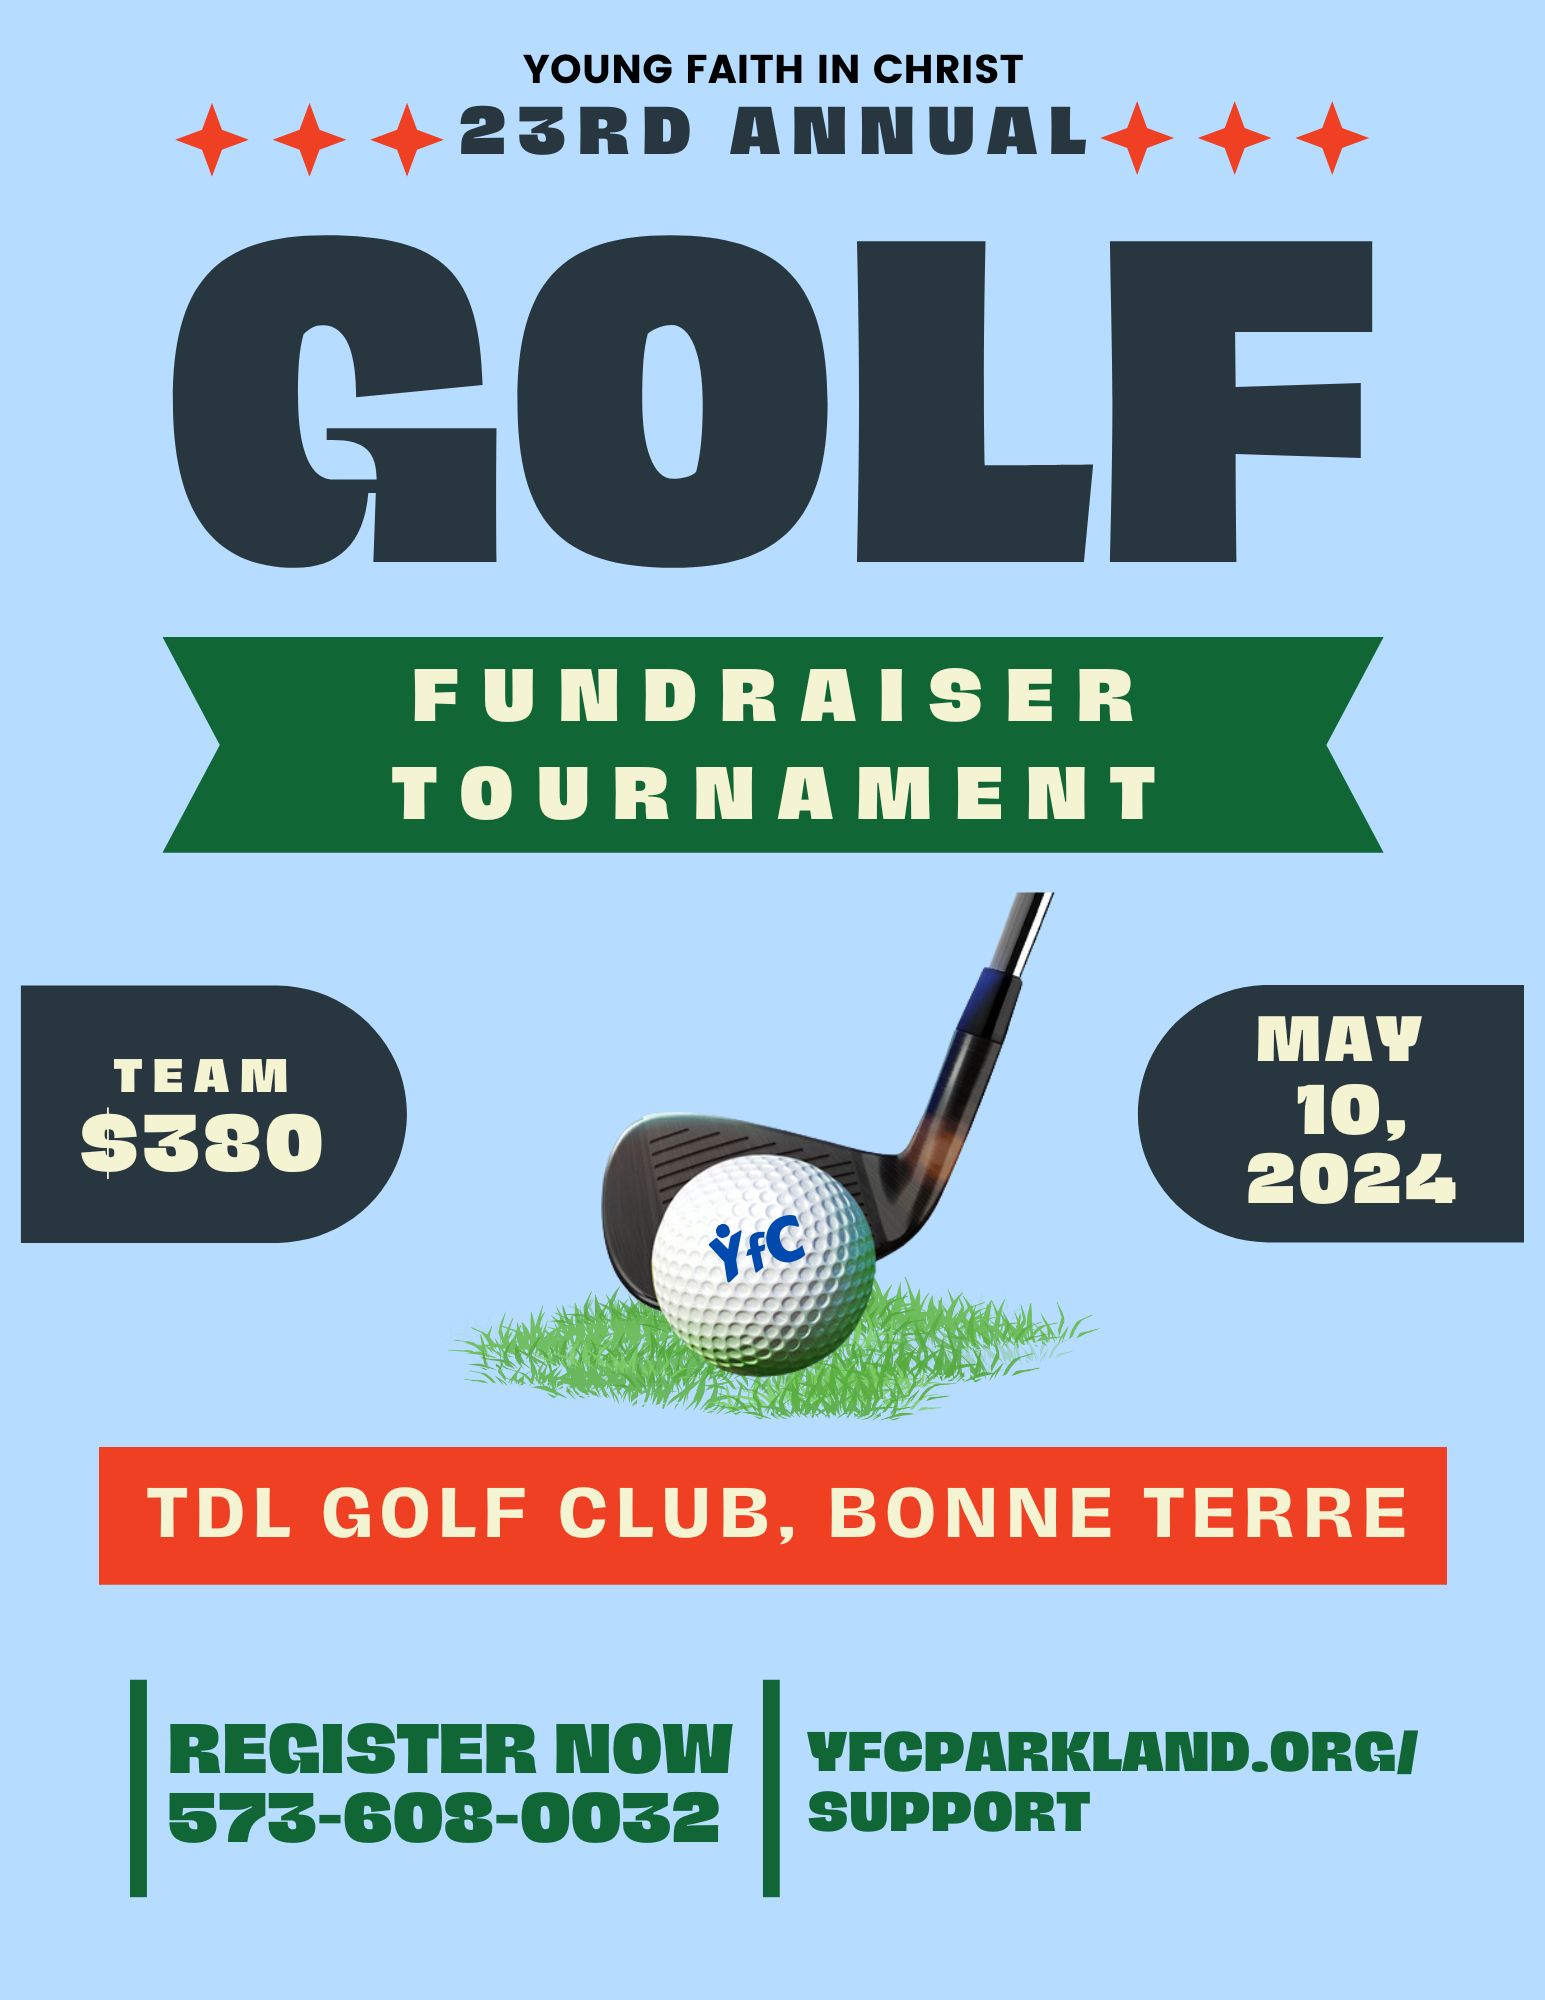 <h1 class="tribe-events-single-event-title">Golf Scramble at Terre du Lac Country Club for Y.F.C.</h1>